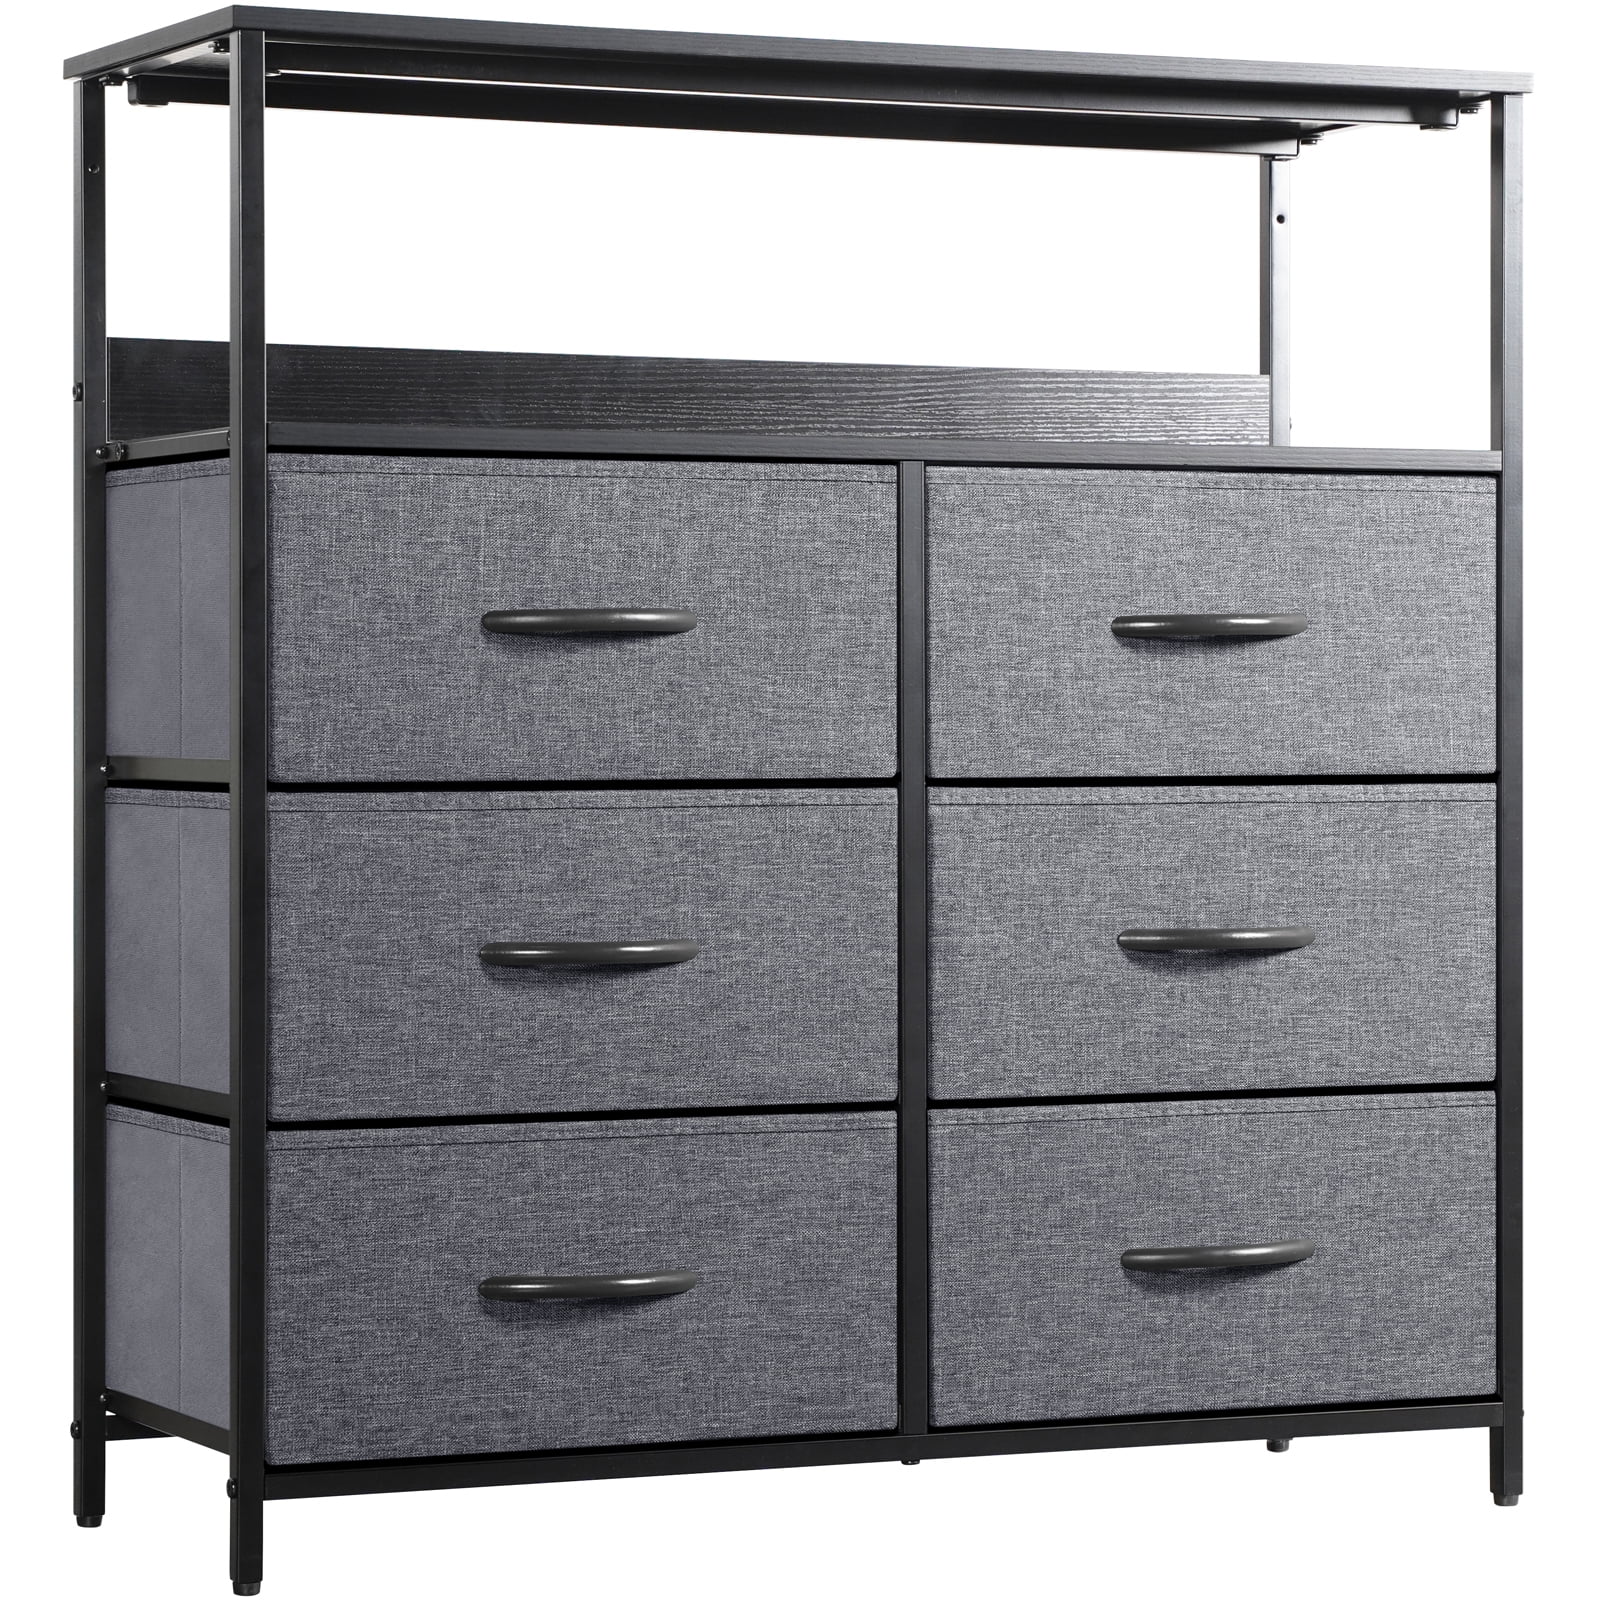 Cabinet　オルゴール　For　LYNCOHOME　Clo＿　With　Drawers　Shelves　Bedroom,　Dresser　Storage　並行輸入品